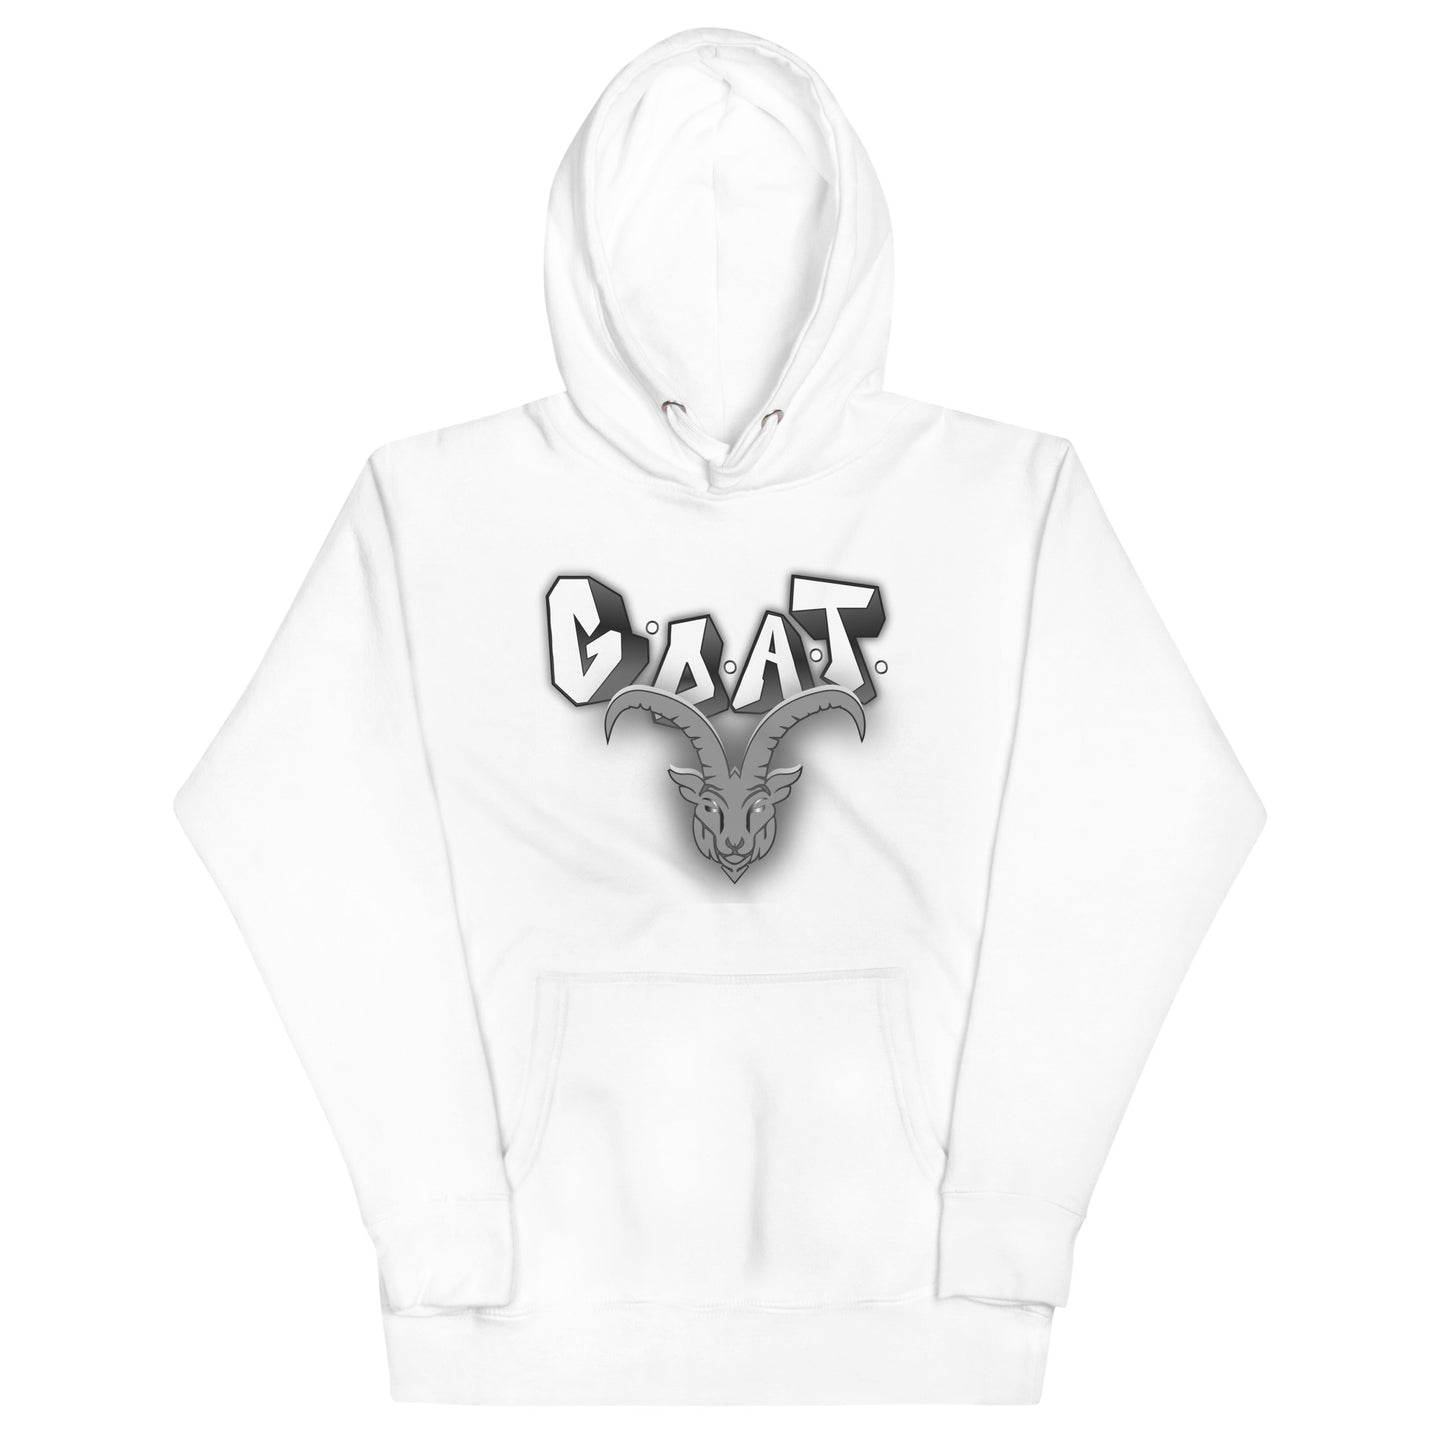 G.O.A.T. Grey Drip Hoodie (6 Colors)